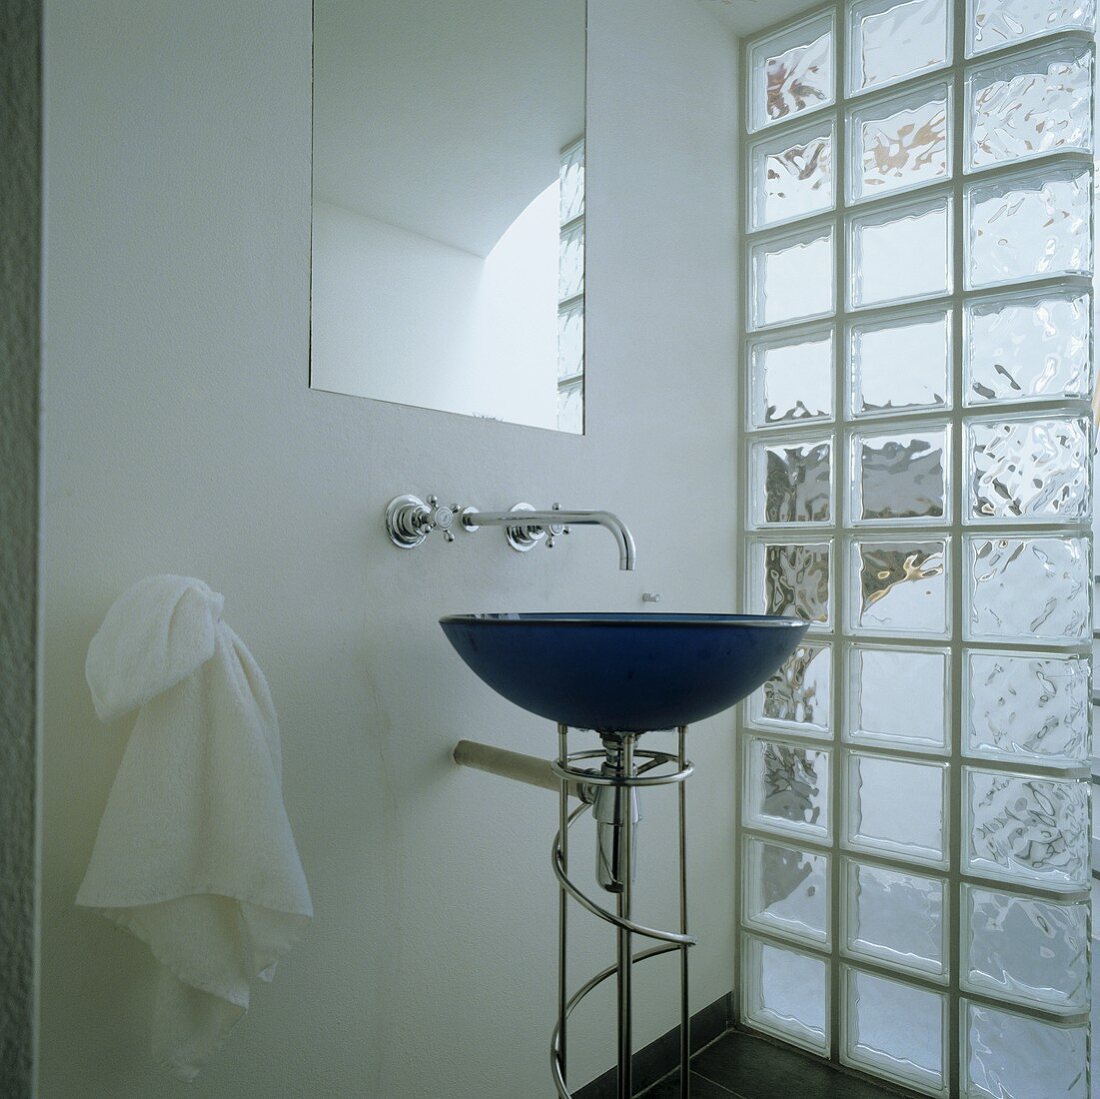 A blue, free-standing wash basin in front of a glass brick wall and a wall tap under a mirror